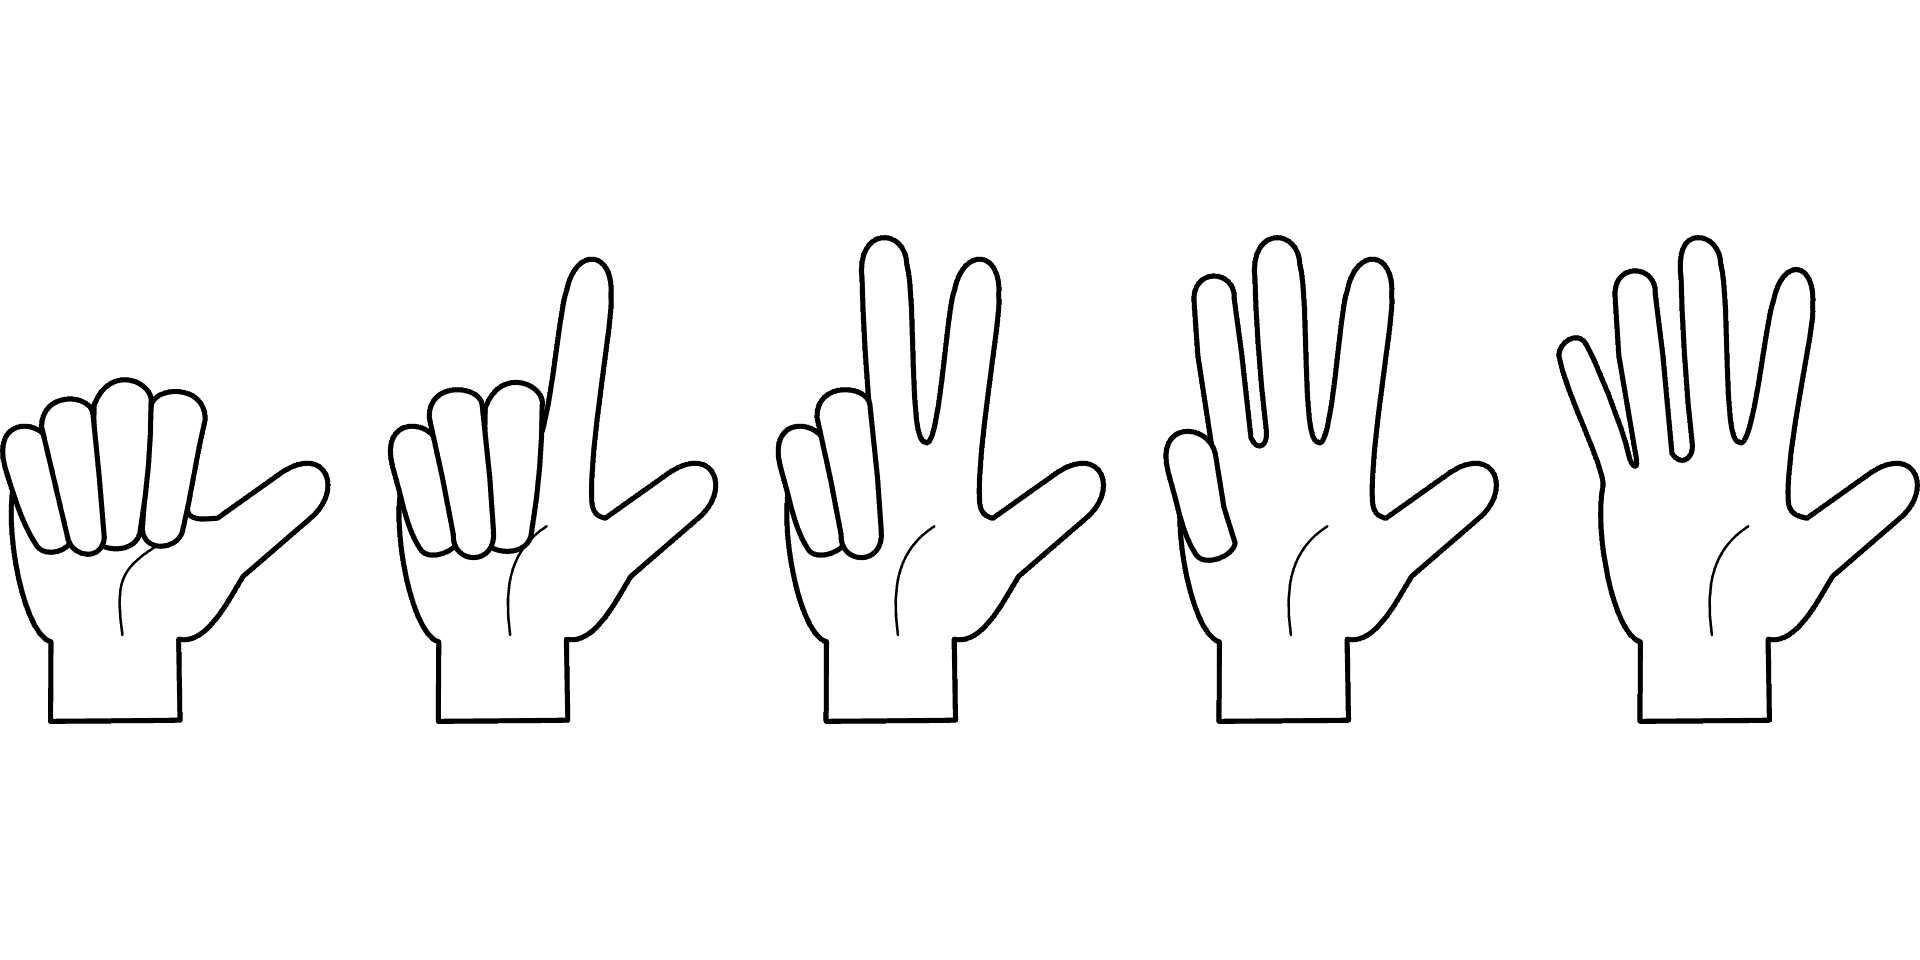 vector image of hands and fingers - HOW TO CONTROL THE CLAIMS IN GROUP HEALTH INSURANCE